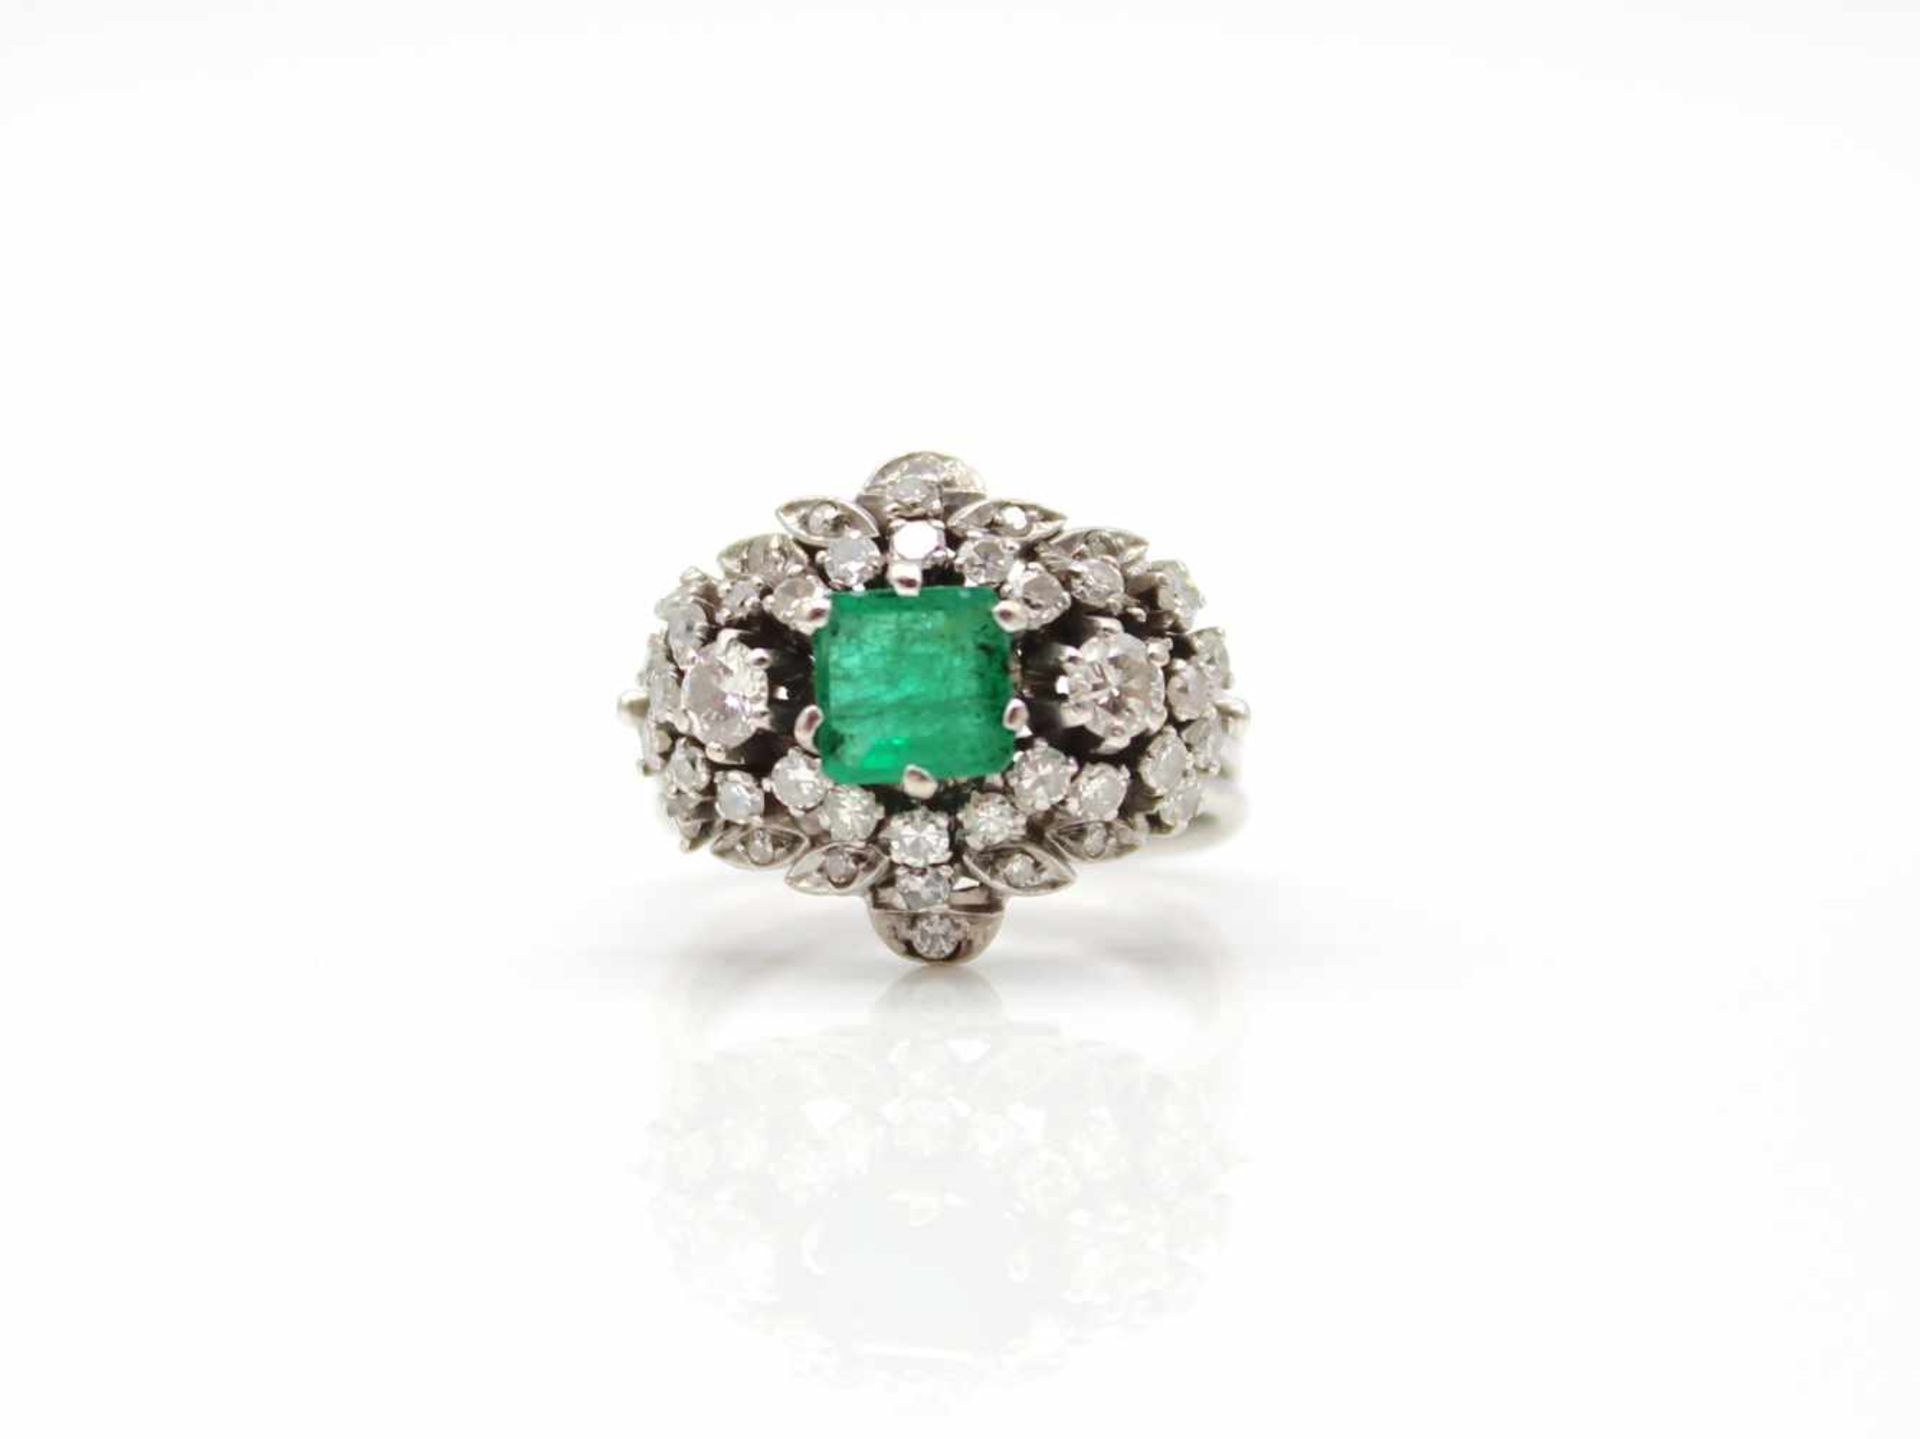 Ring tested for 750 gold with an emerald of approx. 1 ct and 41 diamonds, total approx. 1.1 ct (